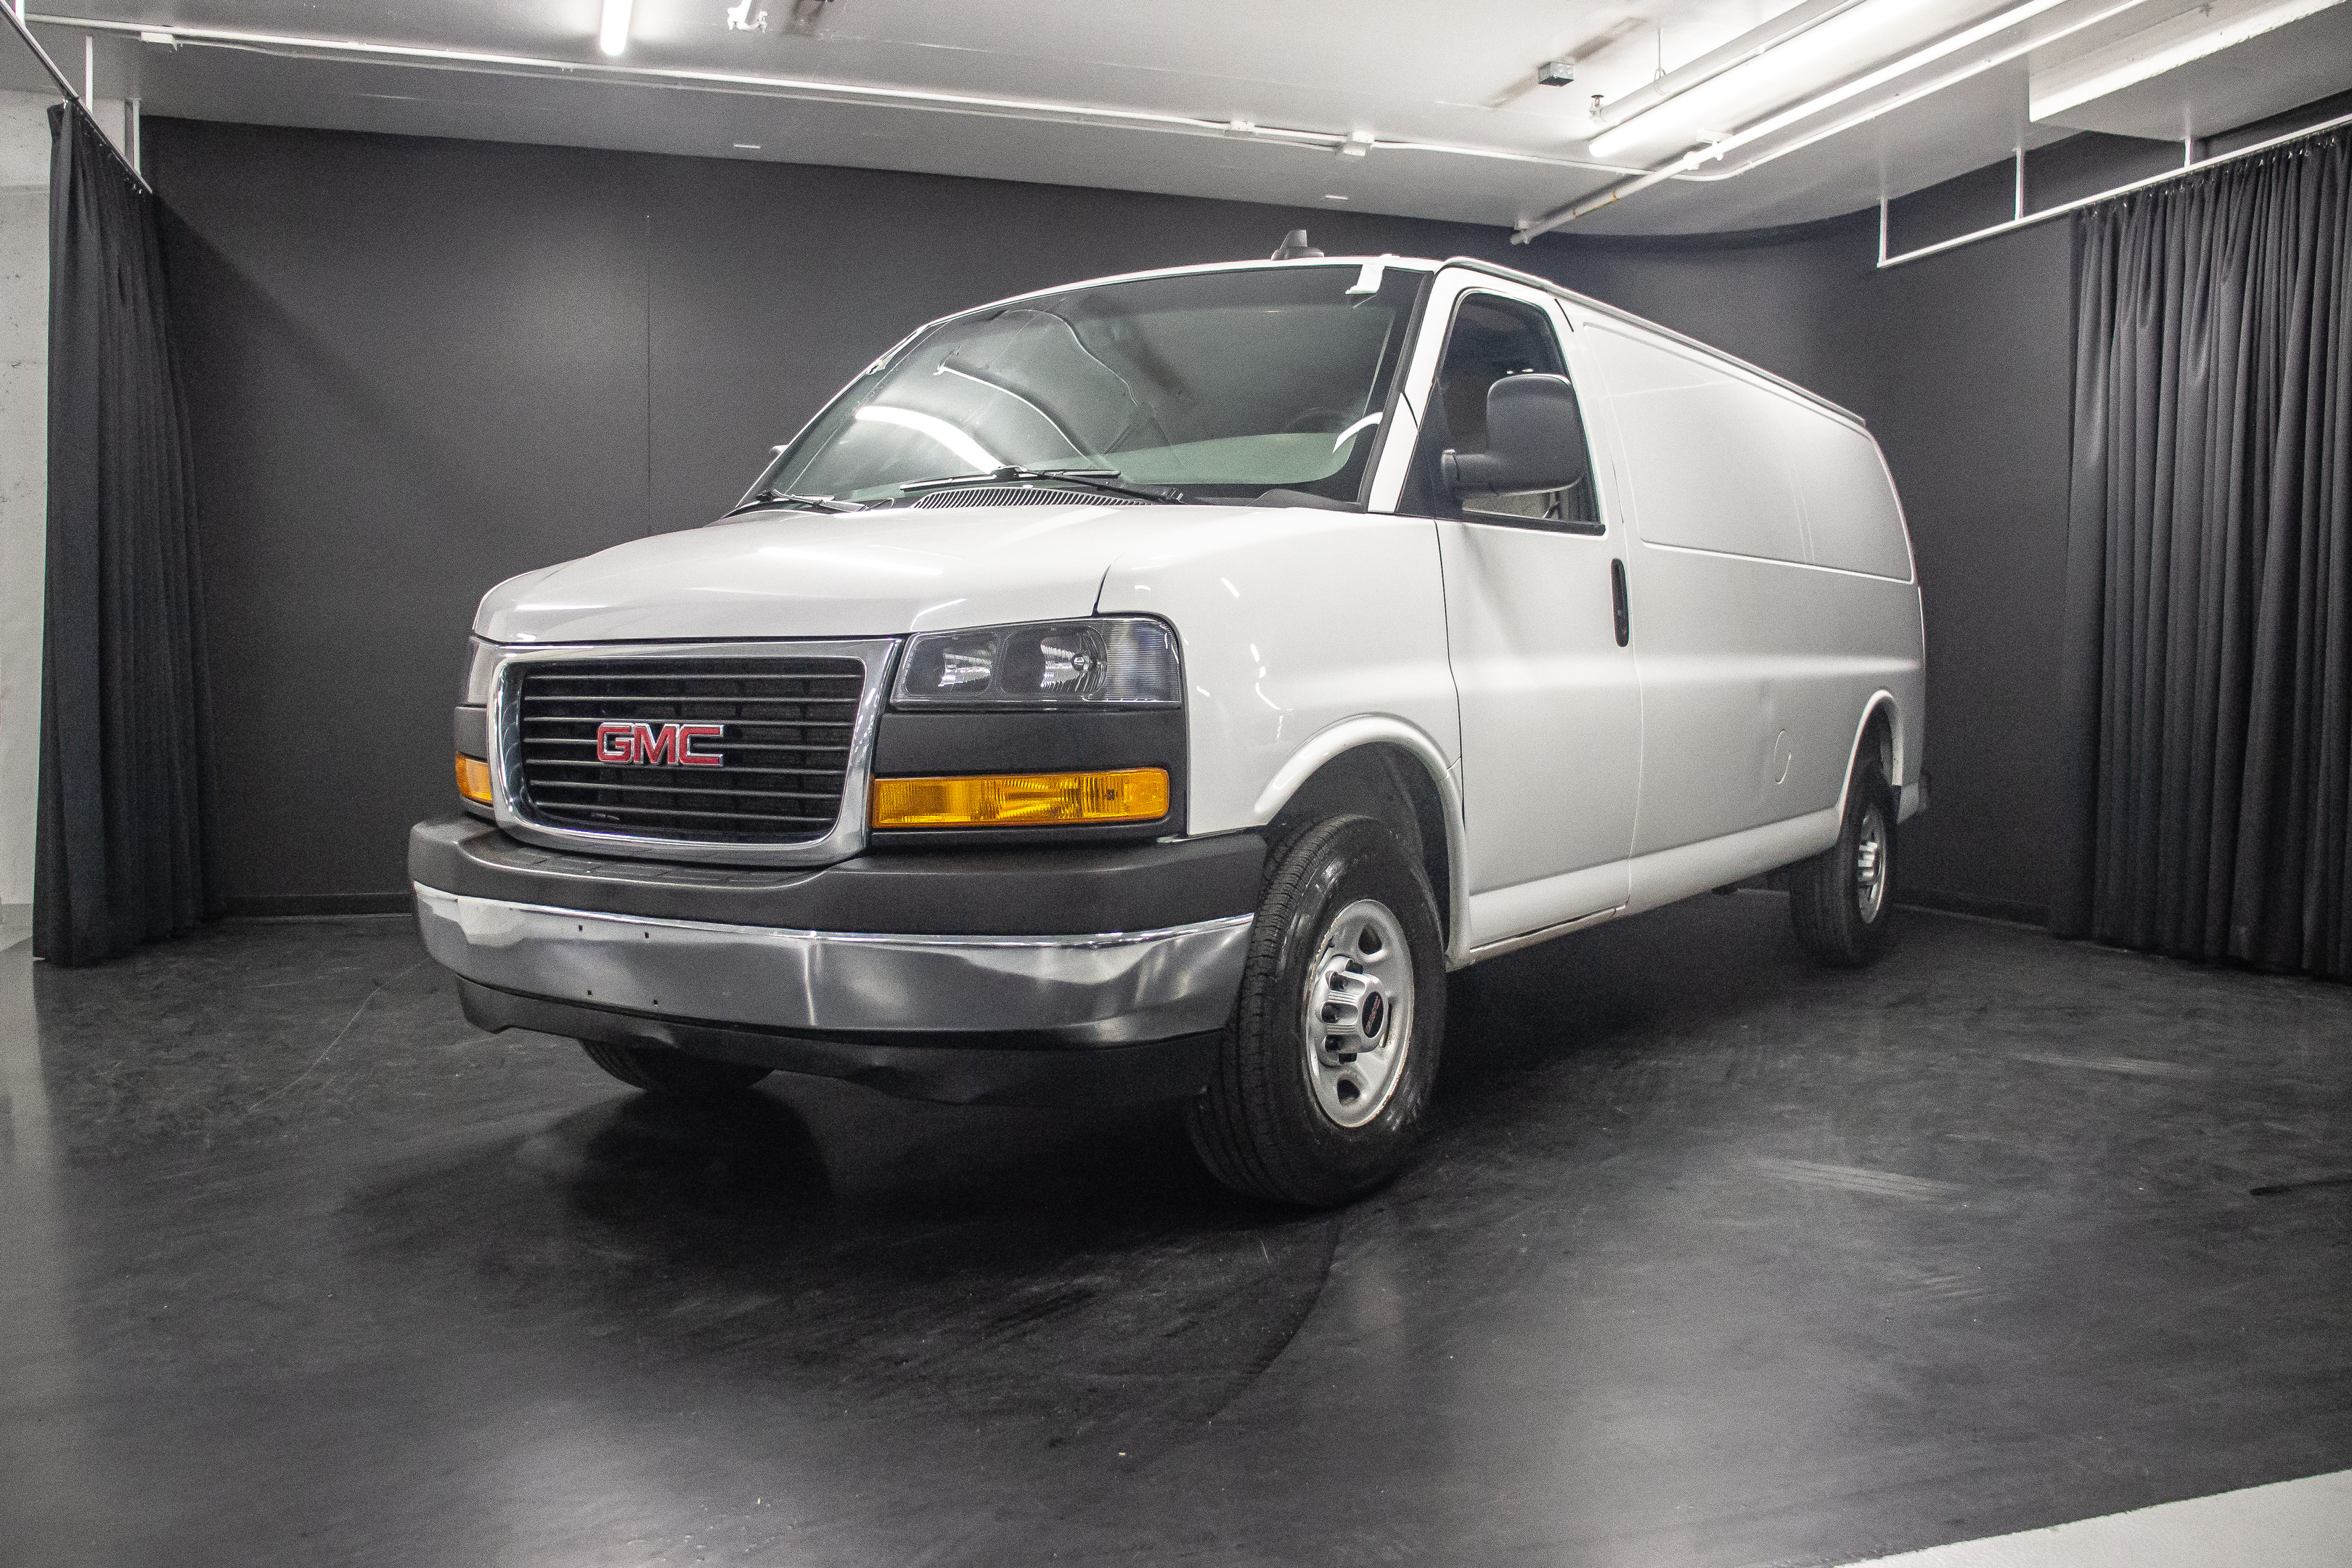 2023 GMC Savana 2500 Rent now for $1100 per month on a 6 or 12 months